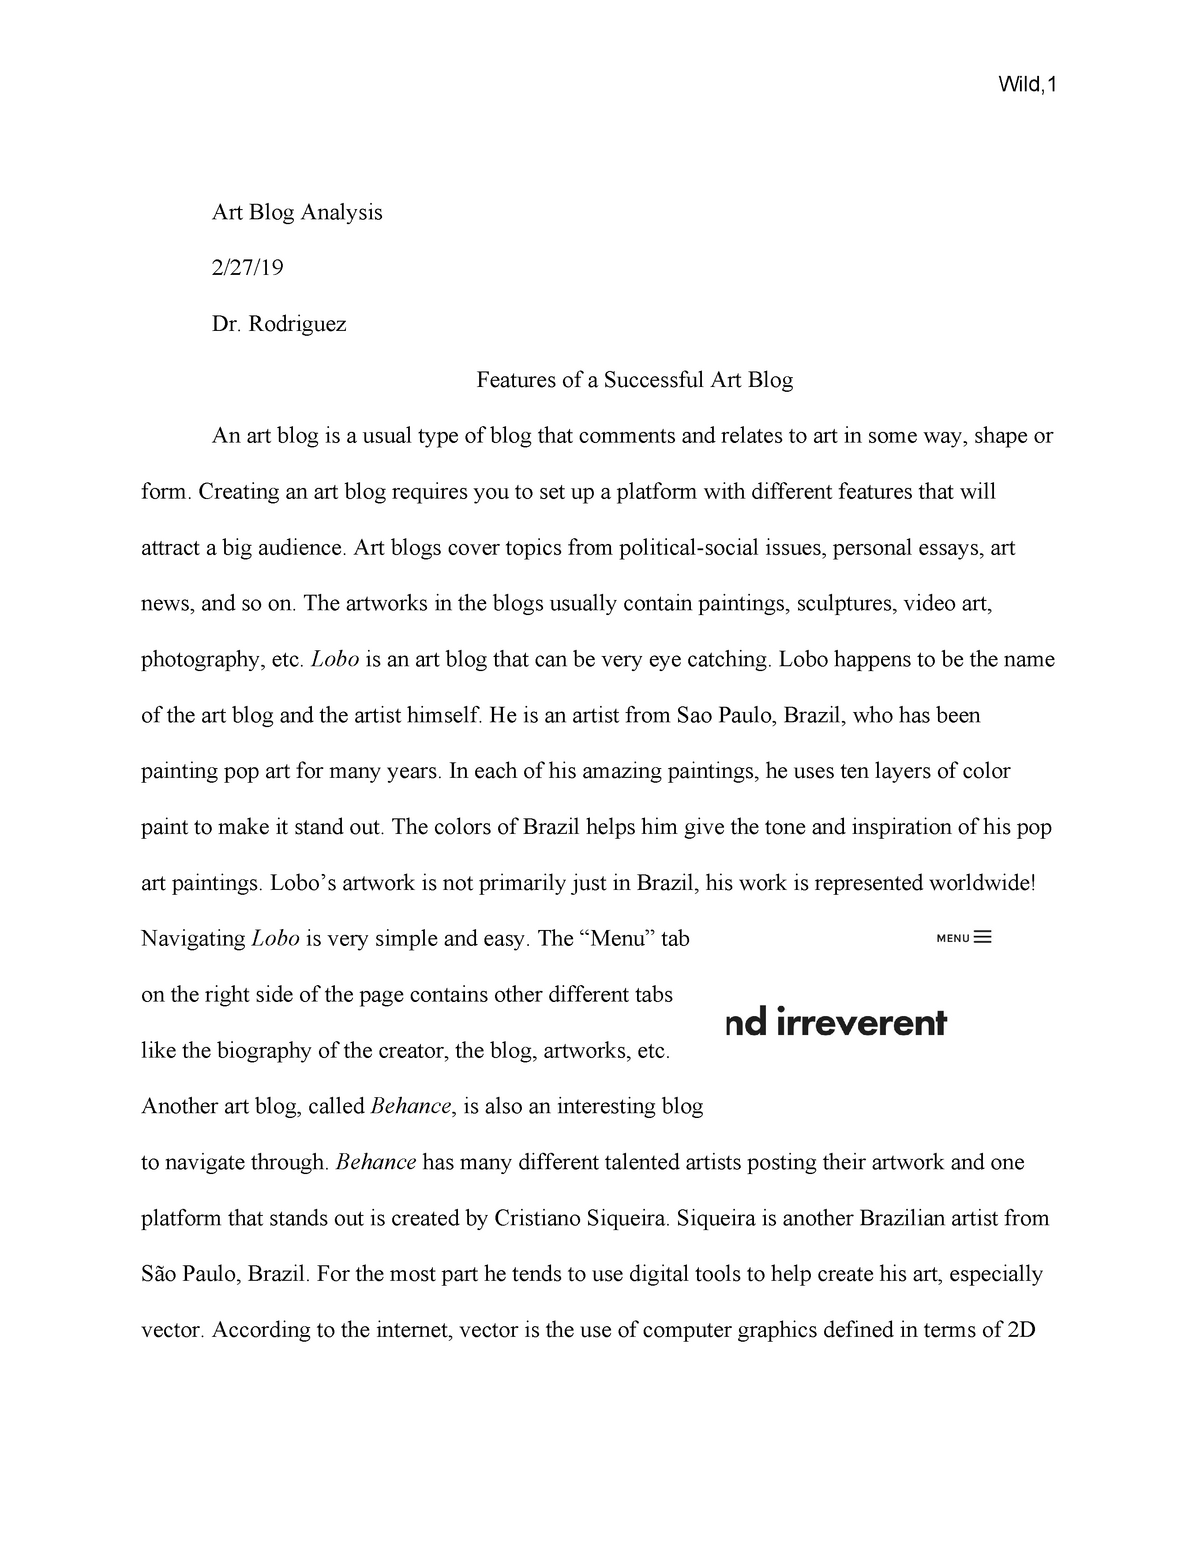 3000 word thesis